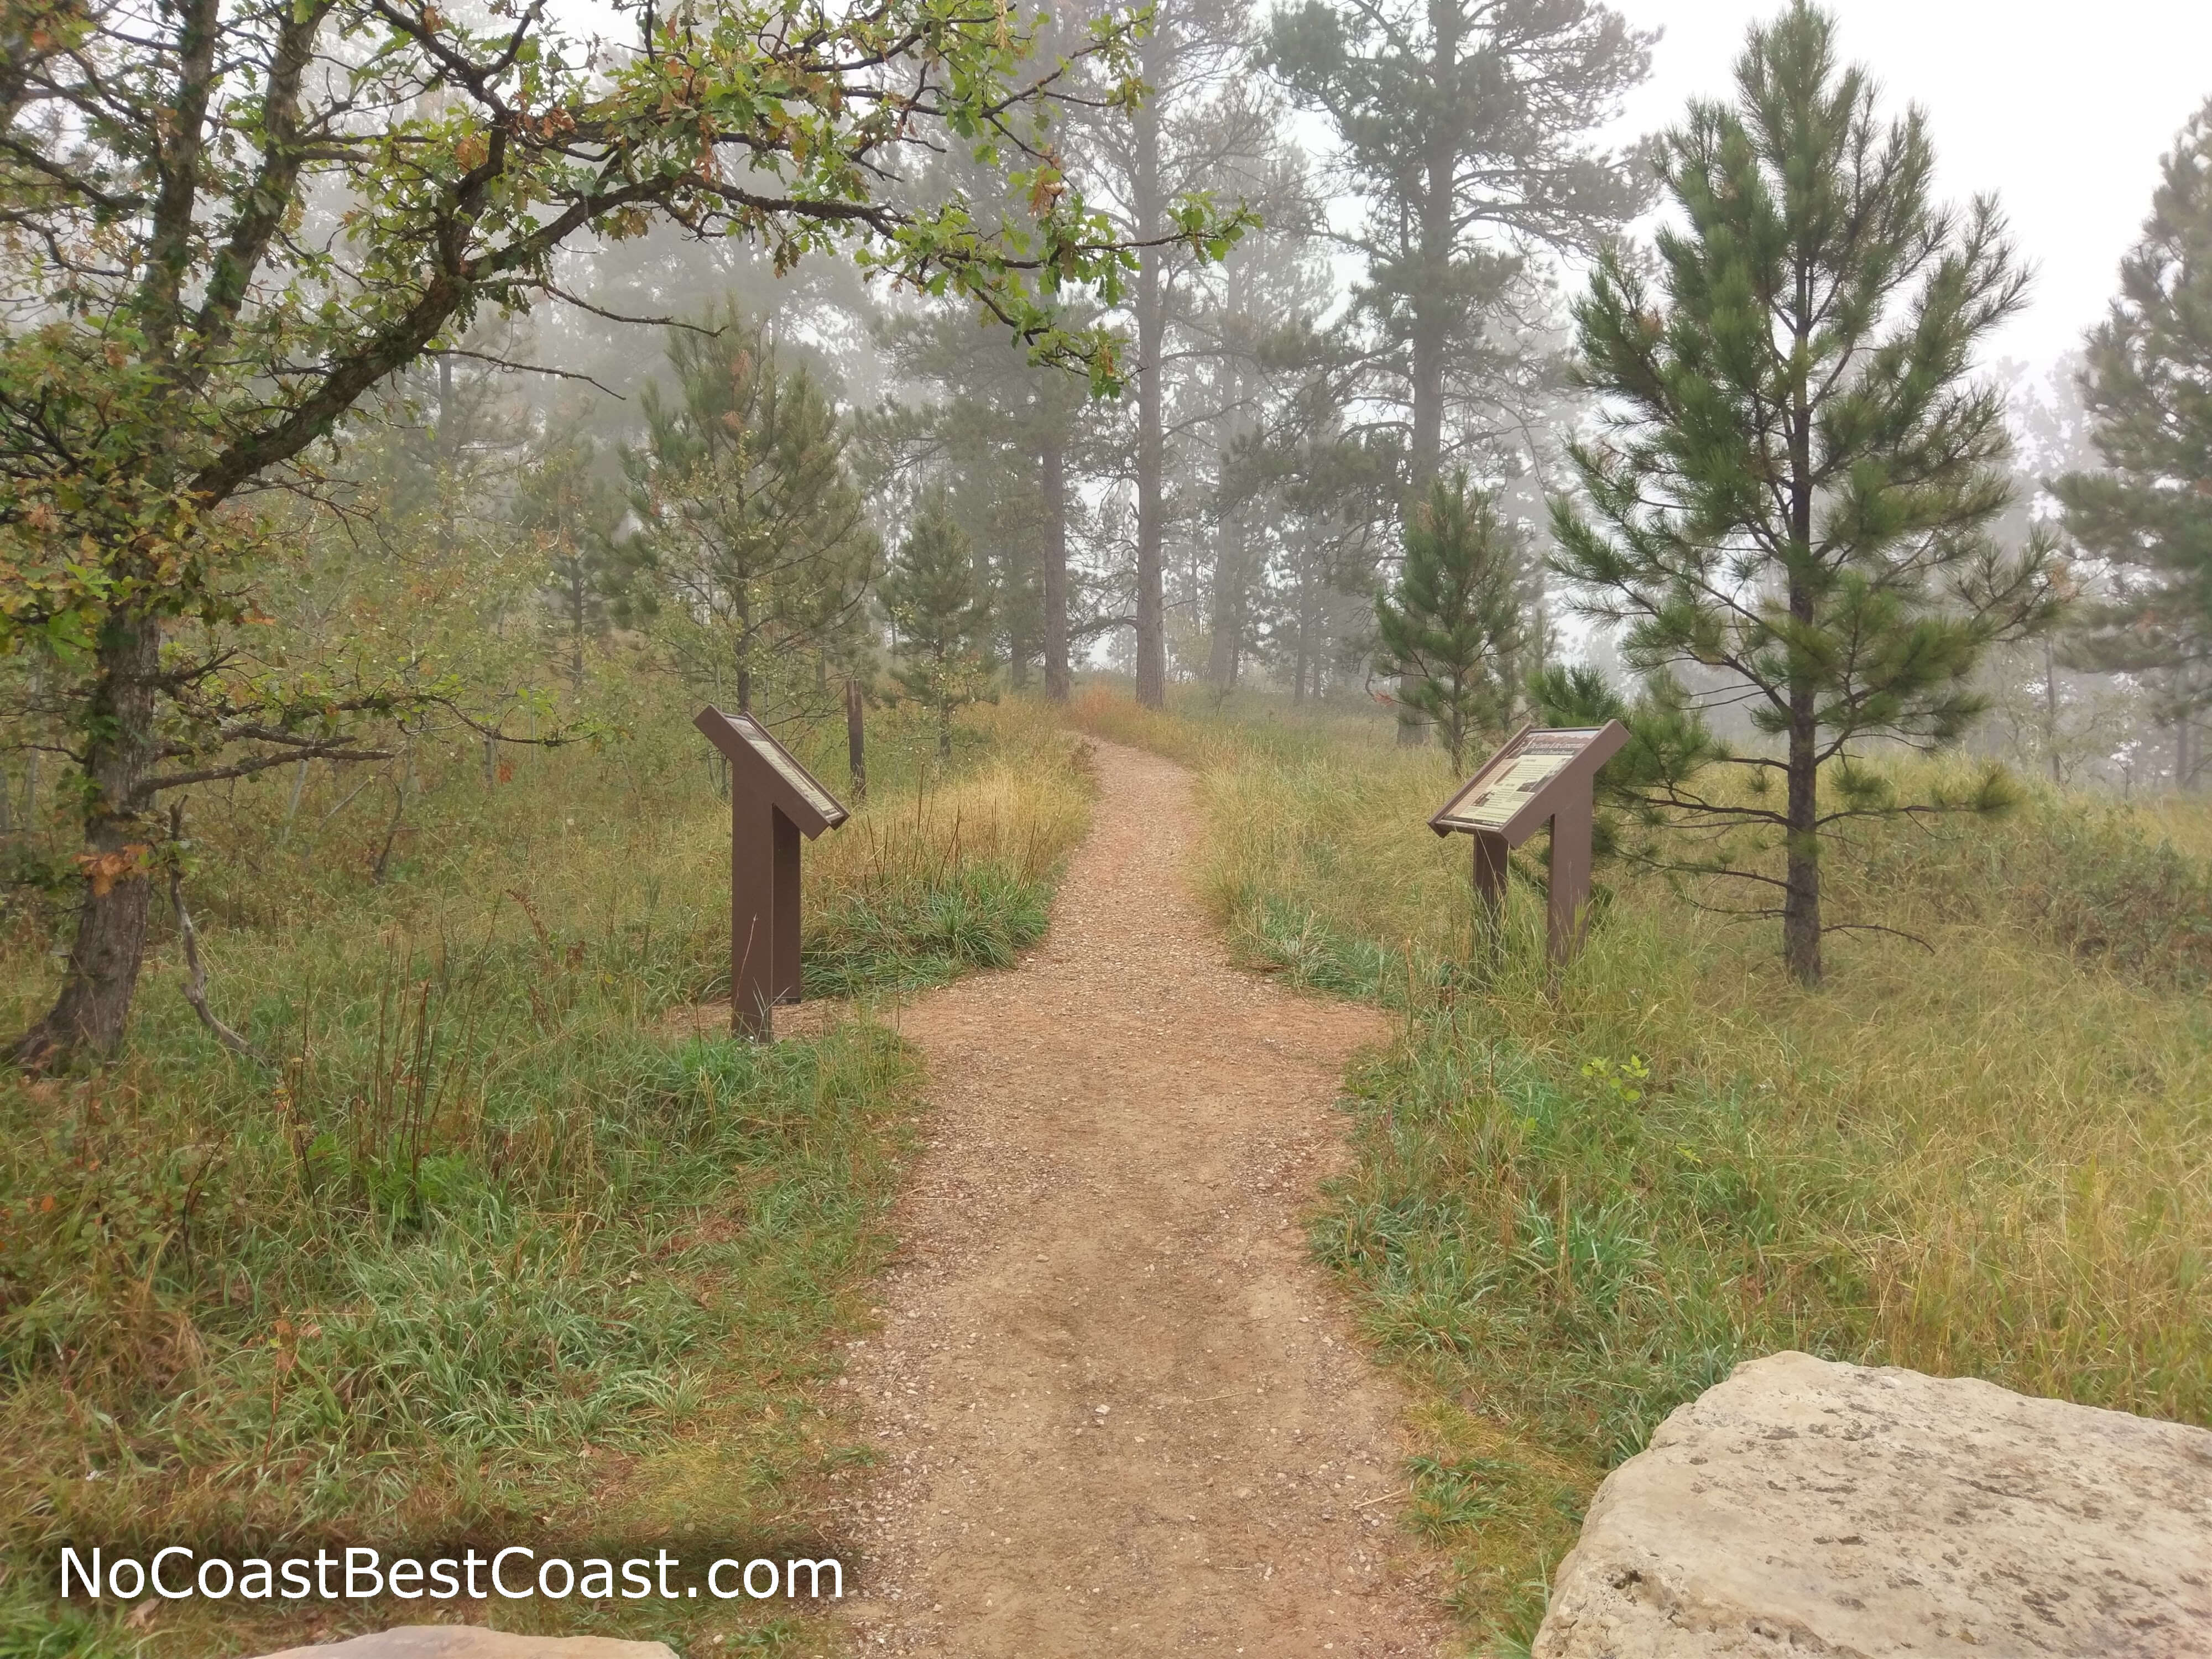 Learn about Teddy Roosevelt and Seth Bullock on the two signs at the trailhead